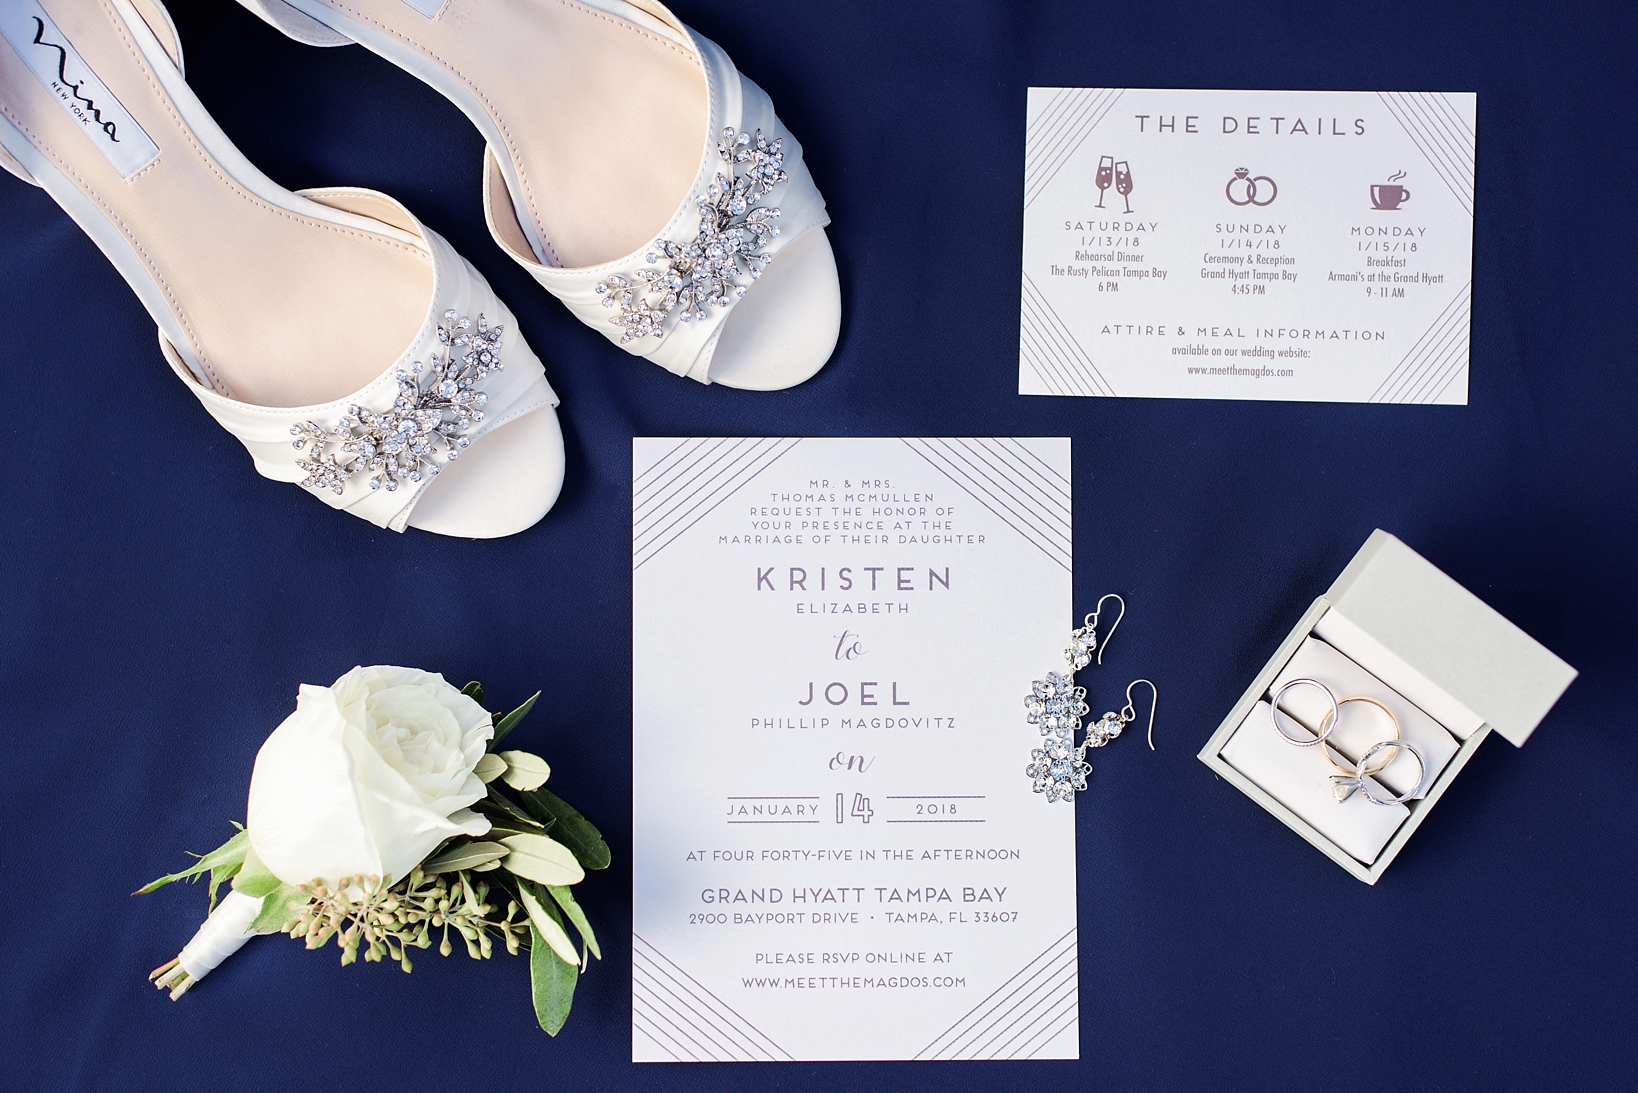 Lay flat of wedding jewelry and florals with navy color tones